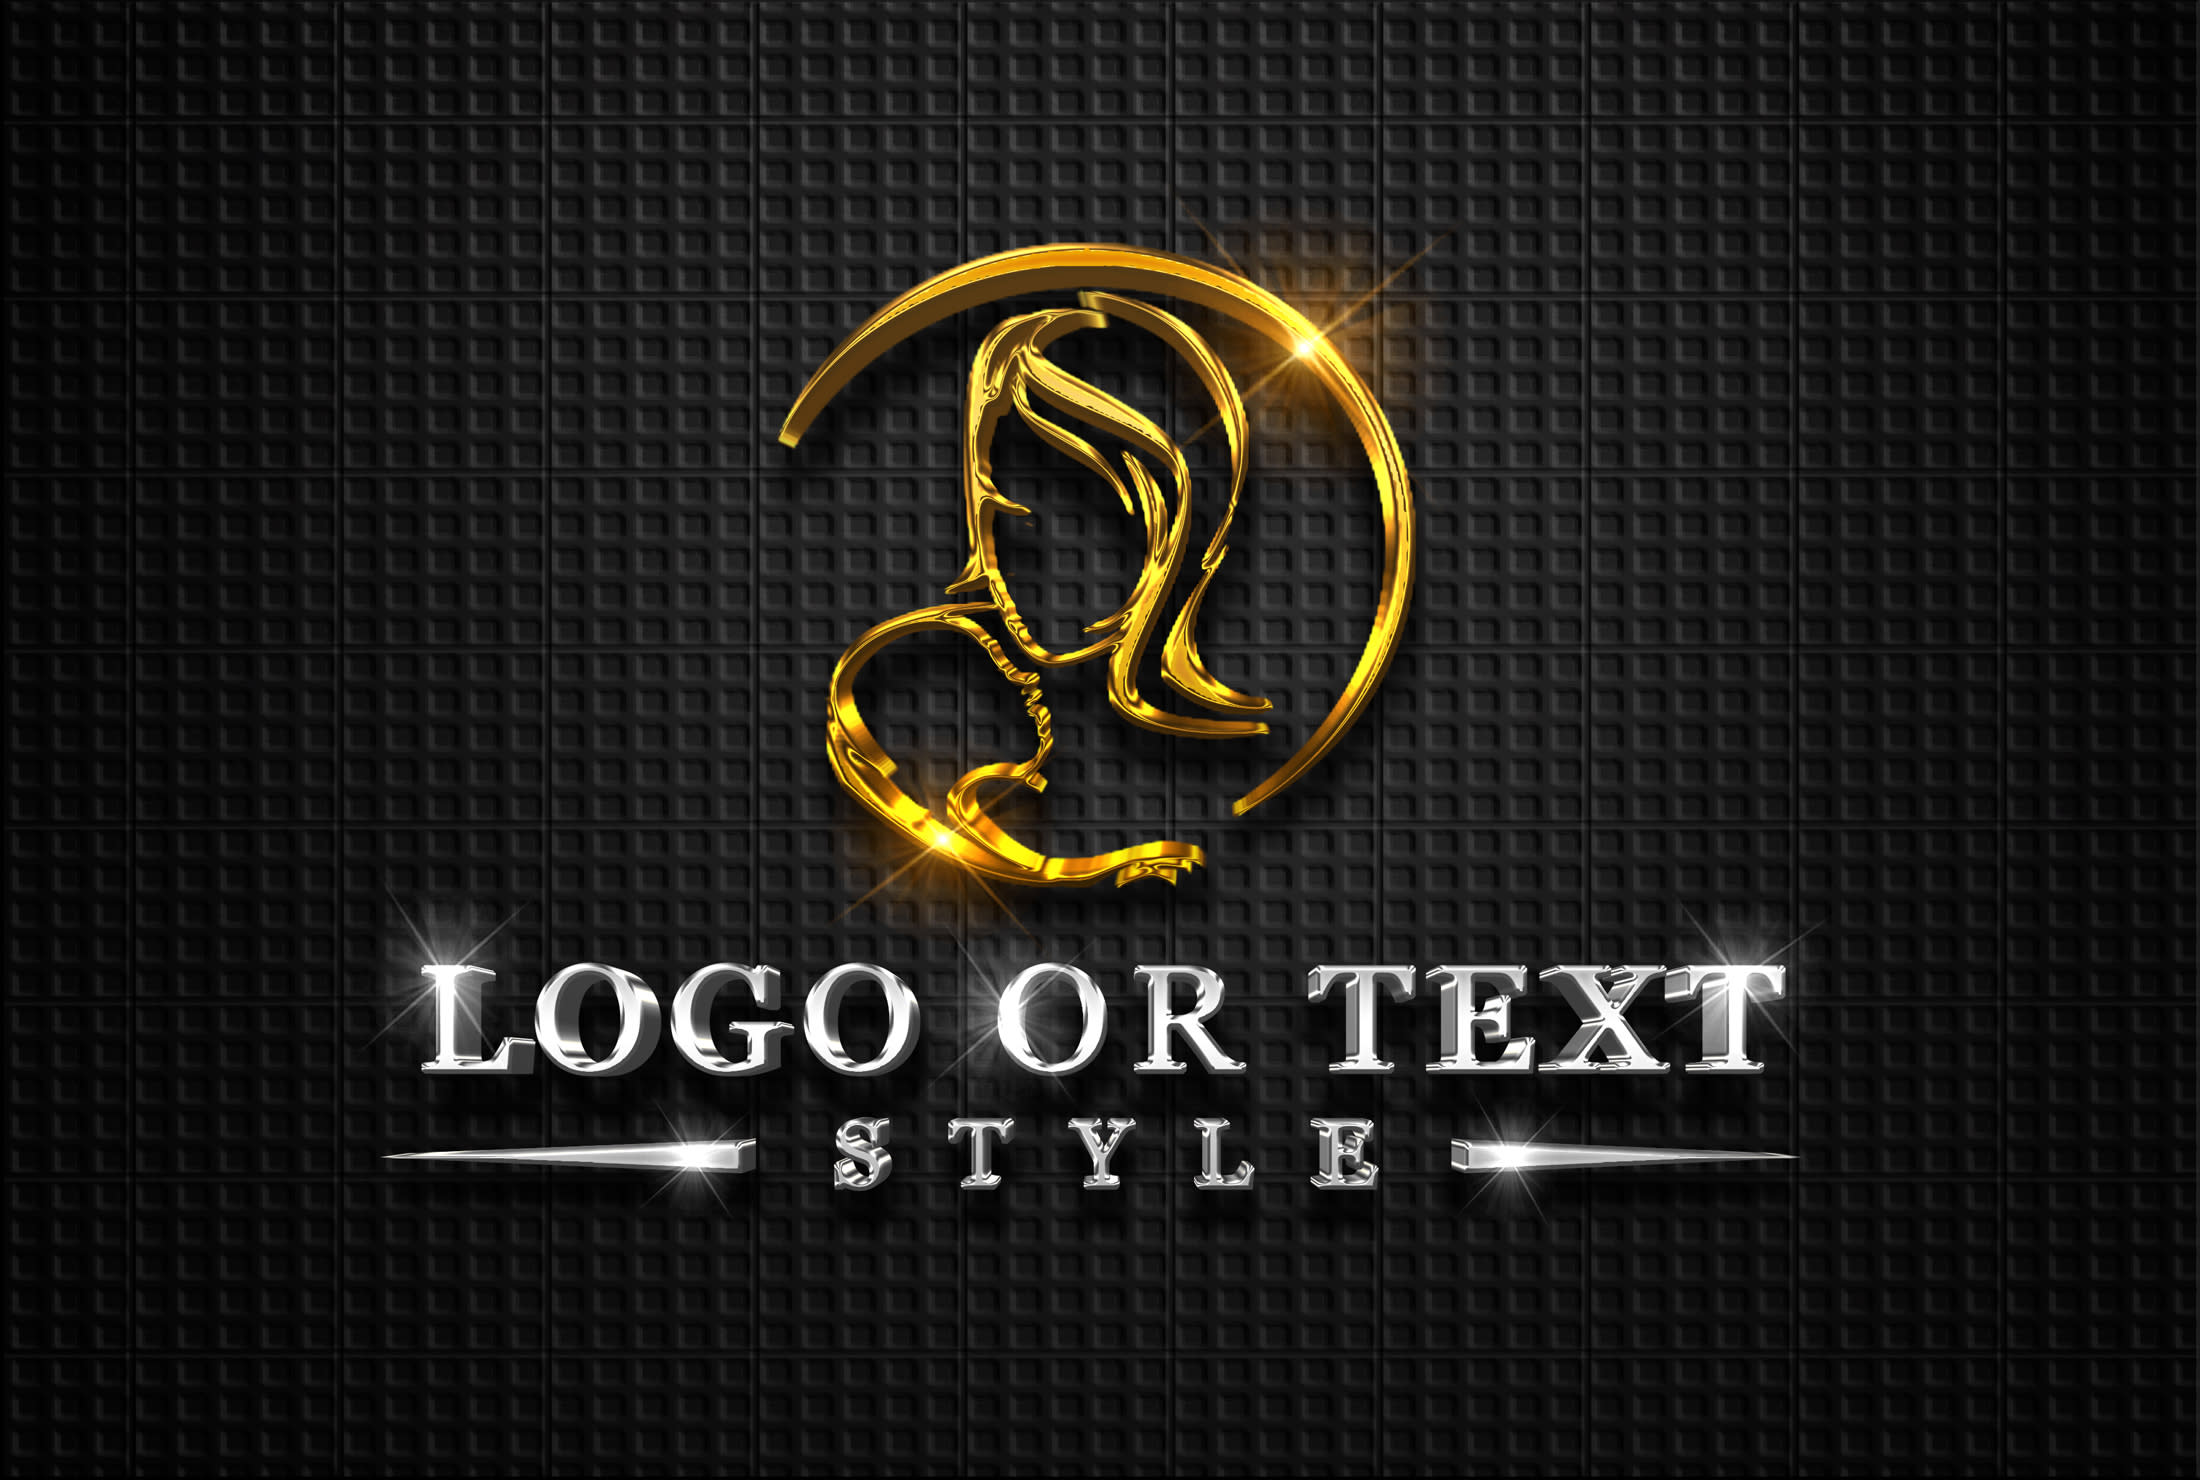 Design Professional 3d Logo Or 3d Text Effect For Your Business Brand And Other By Arif02 Fiverr